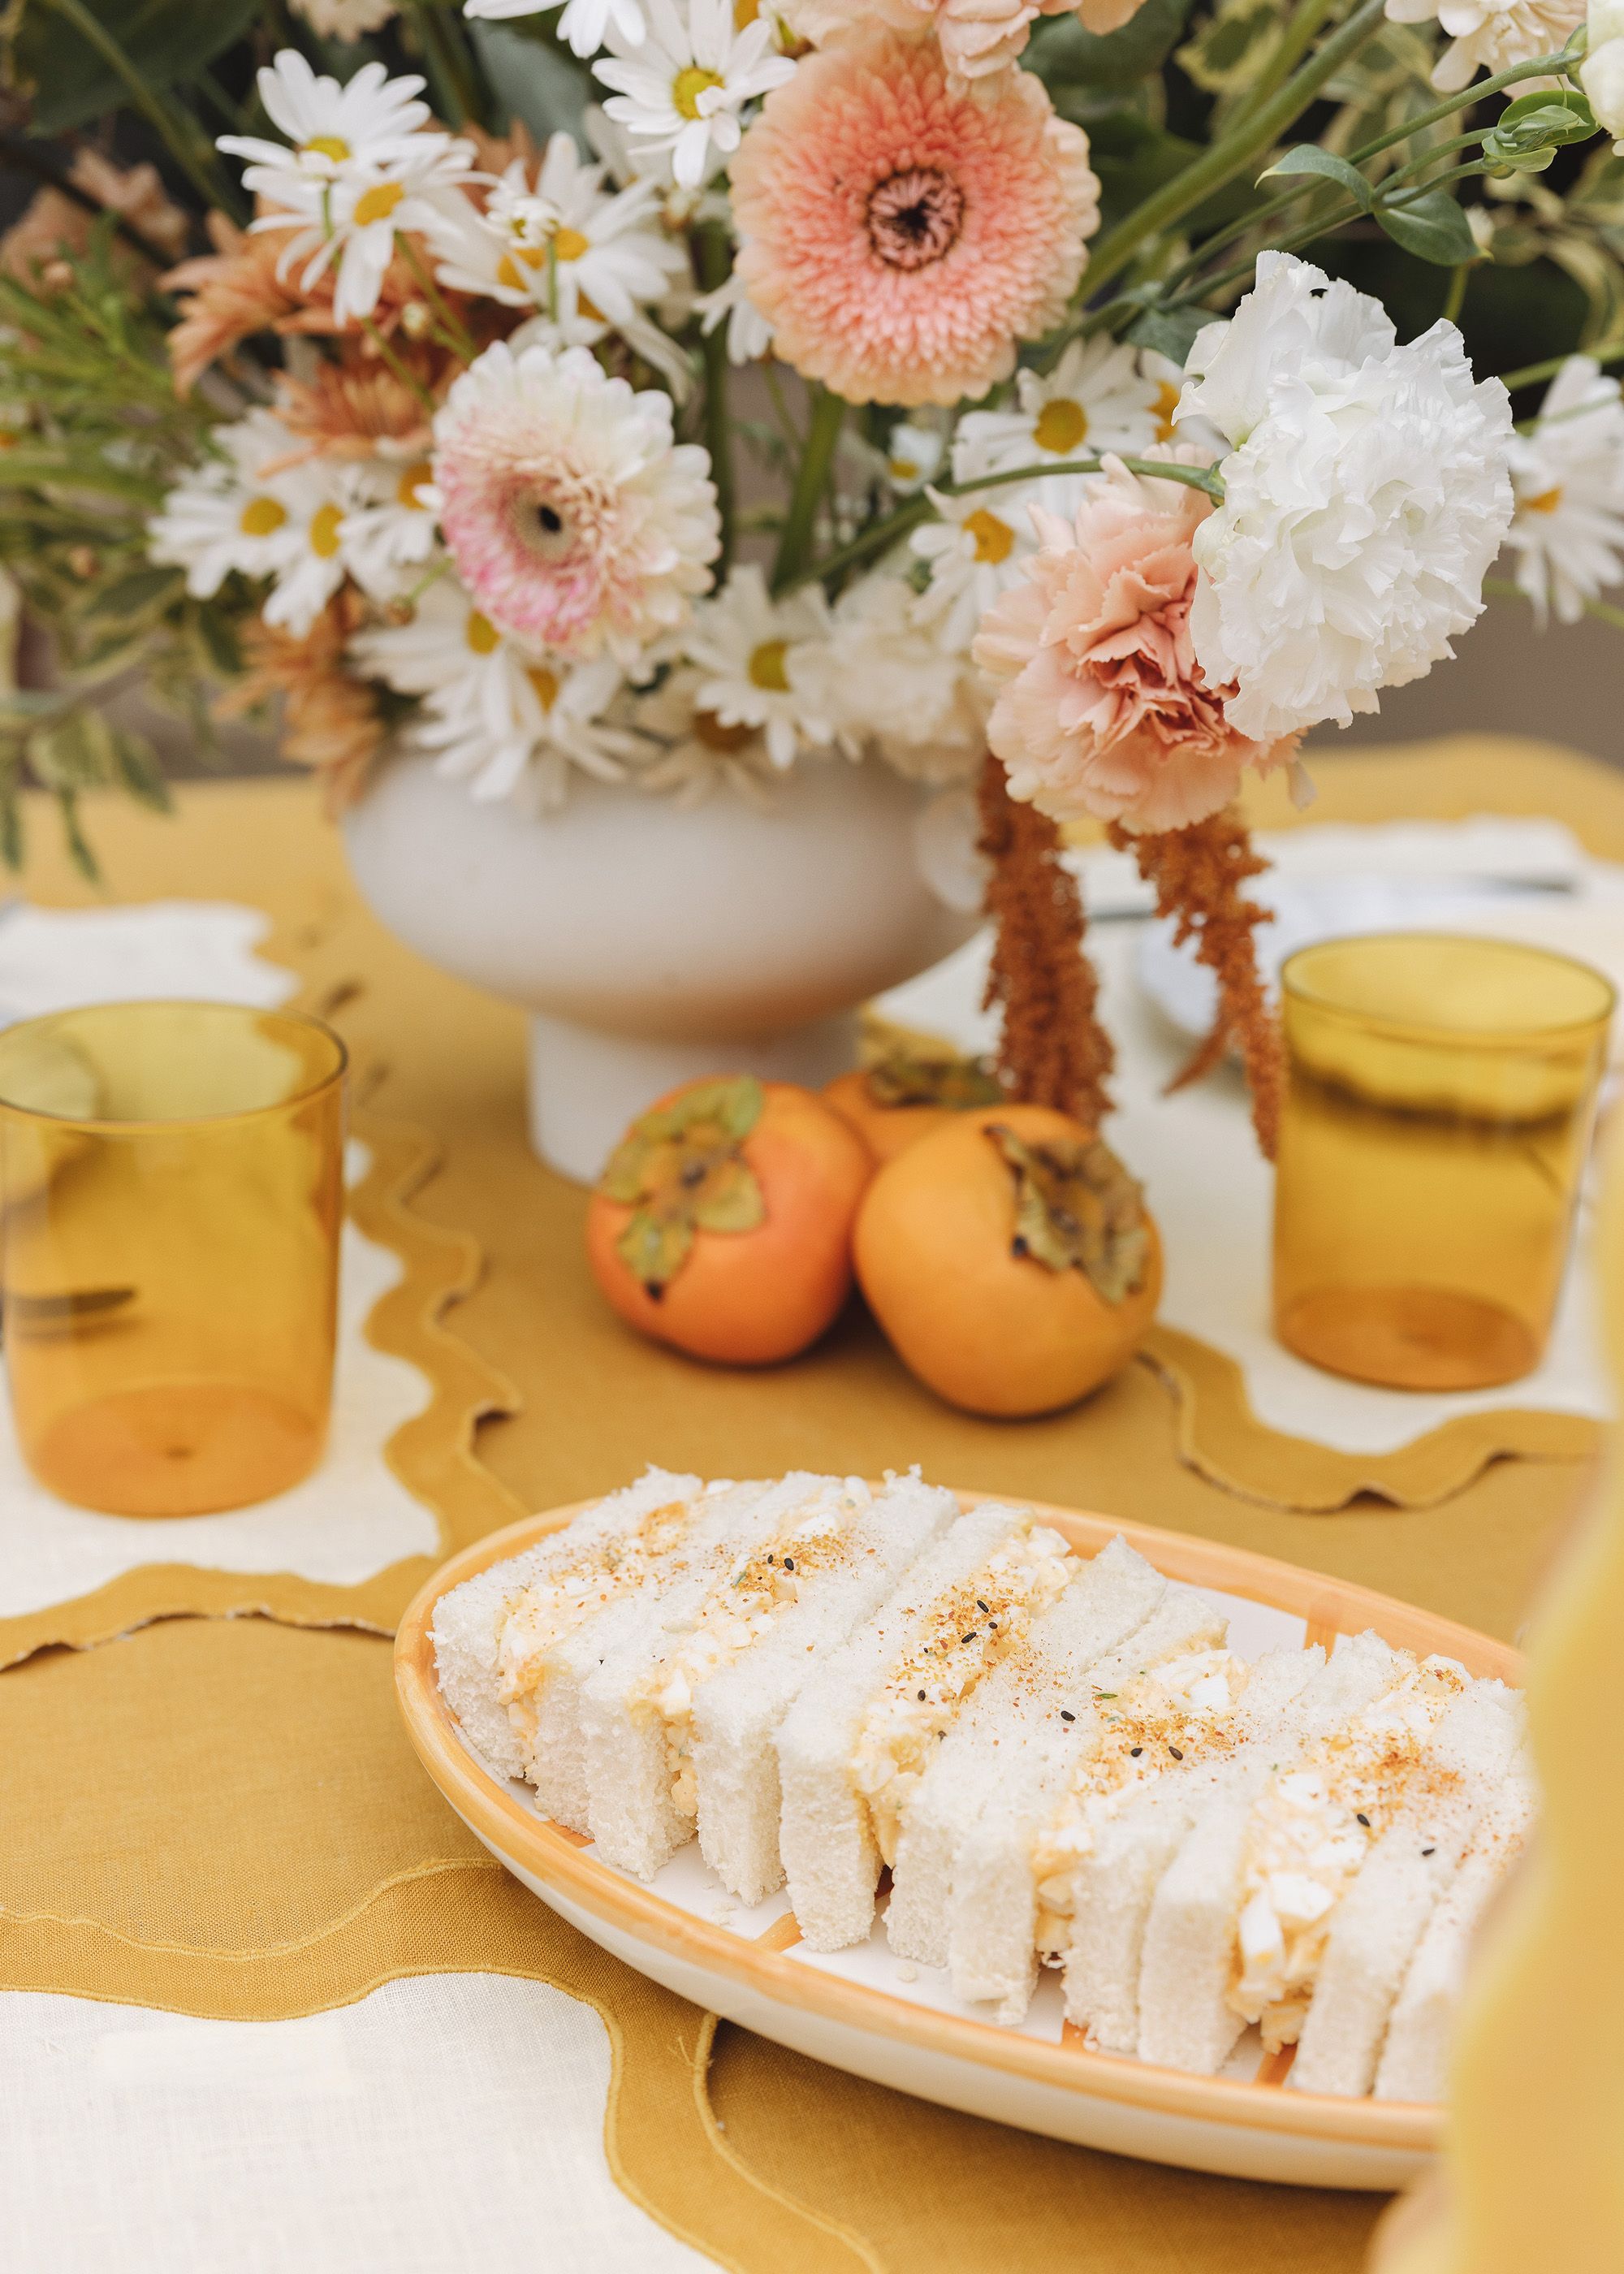 Limoncello & Turmeric 100% French Flax Linen Scalloped Placemats (Set of Four)